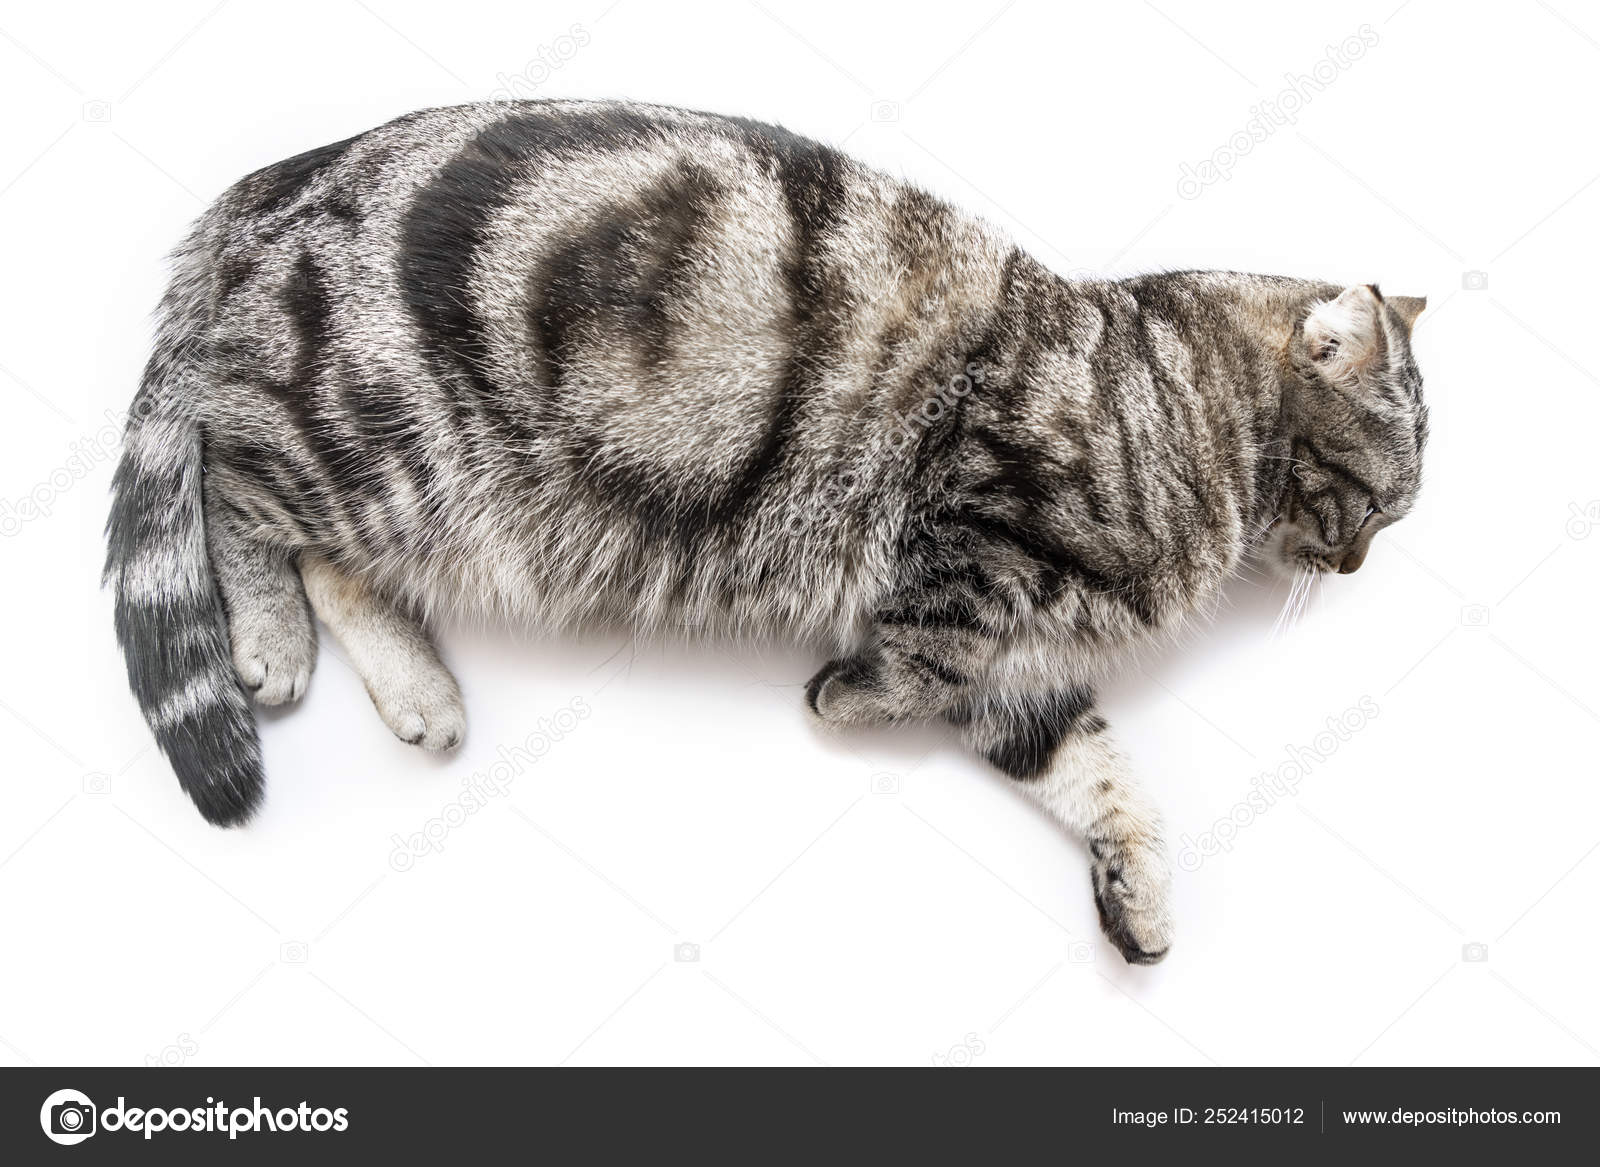 Handsome Black Silver Tabby British Shorthair Cat Laying Down